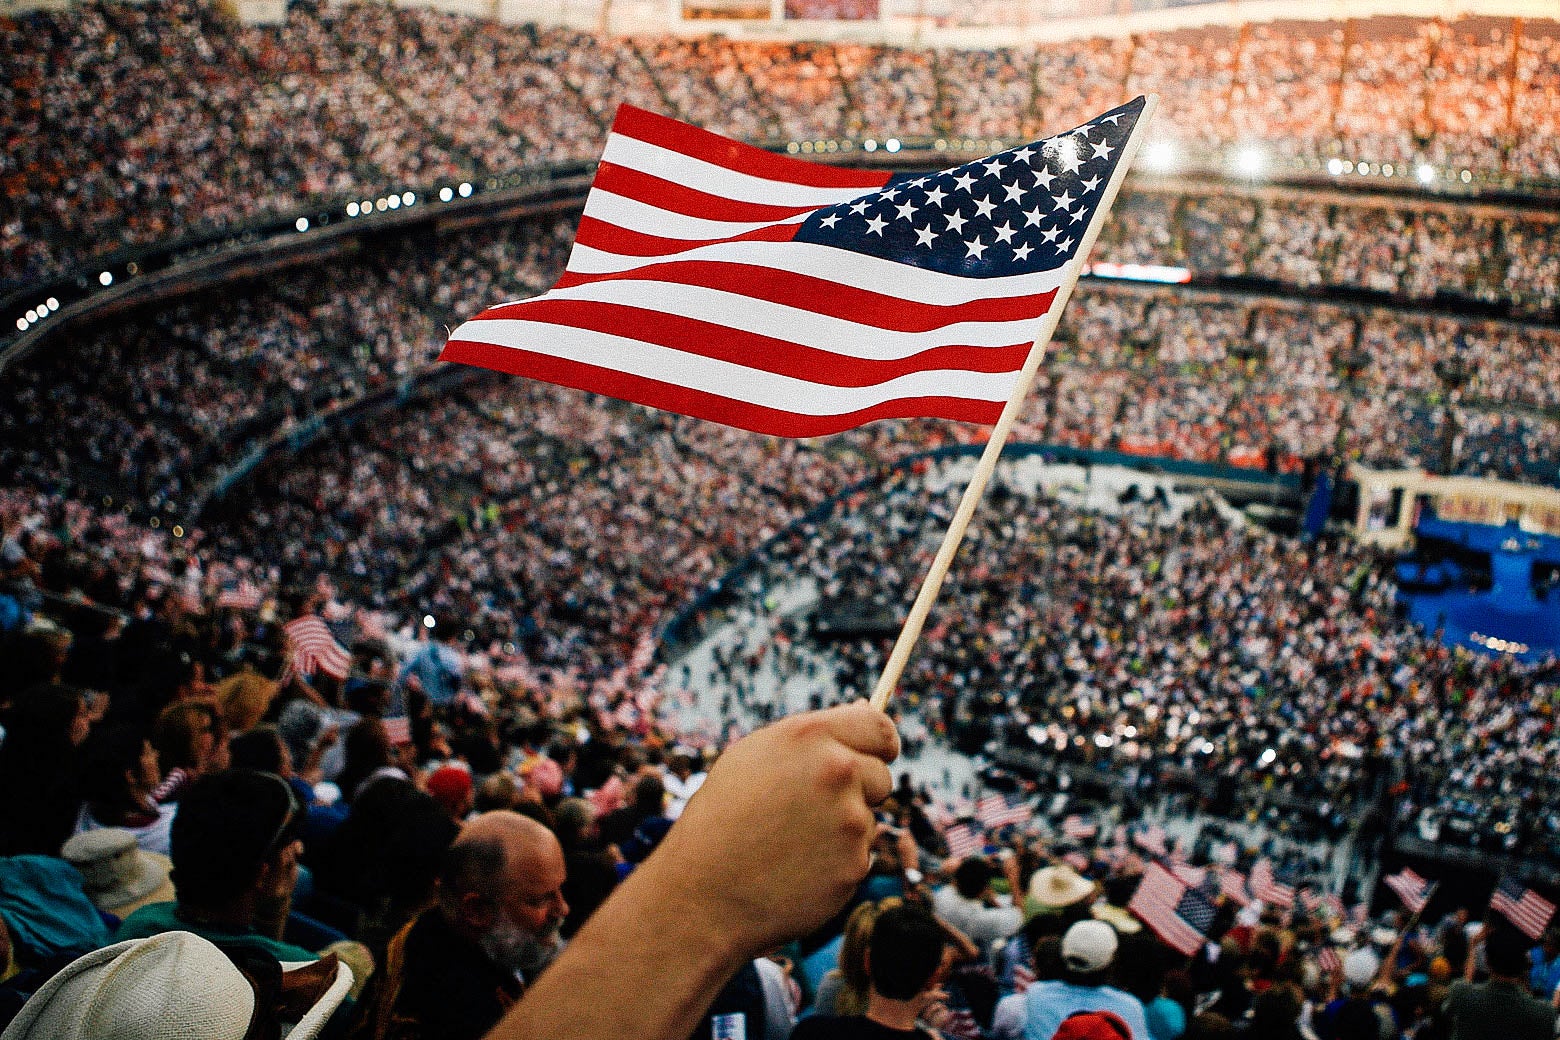 A person holding the American flag at the 2008 Democratic National Convention.